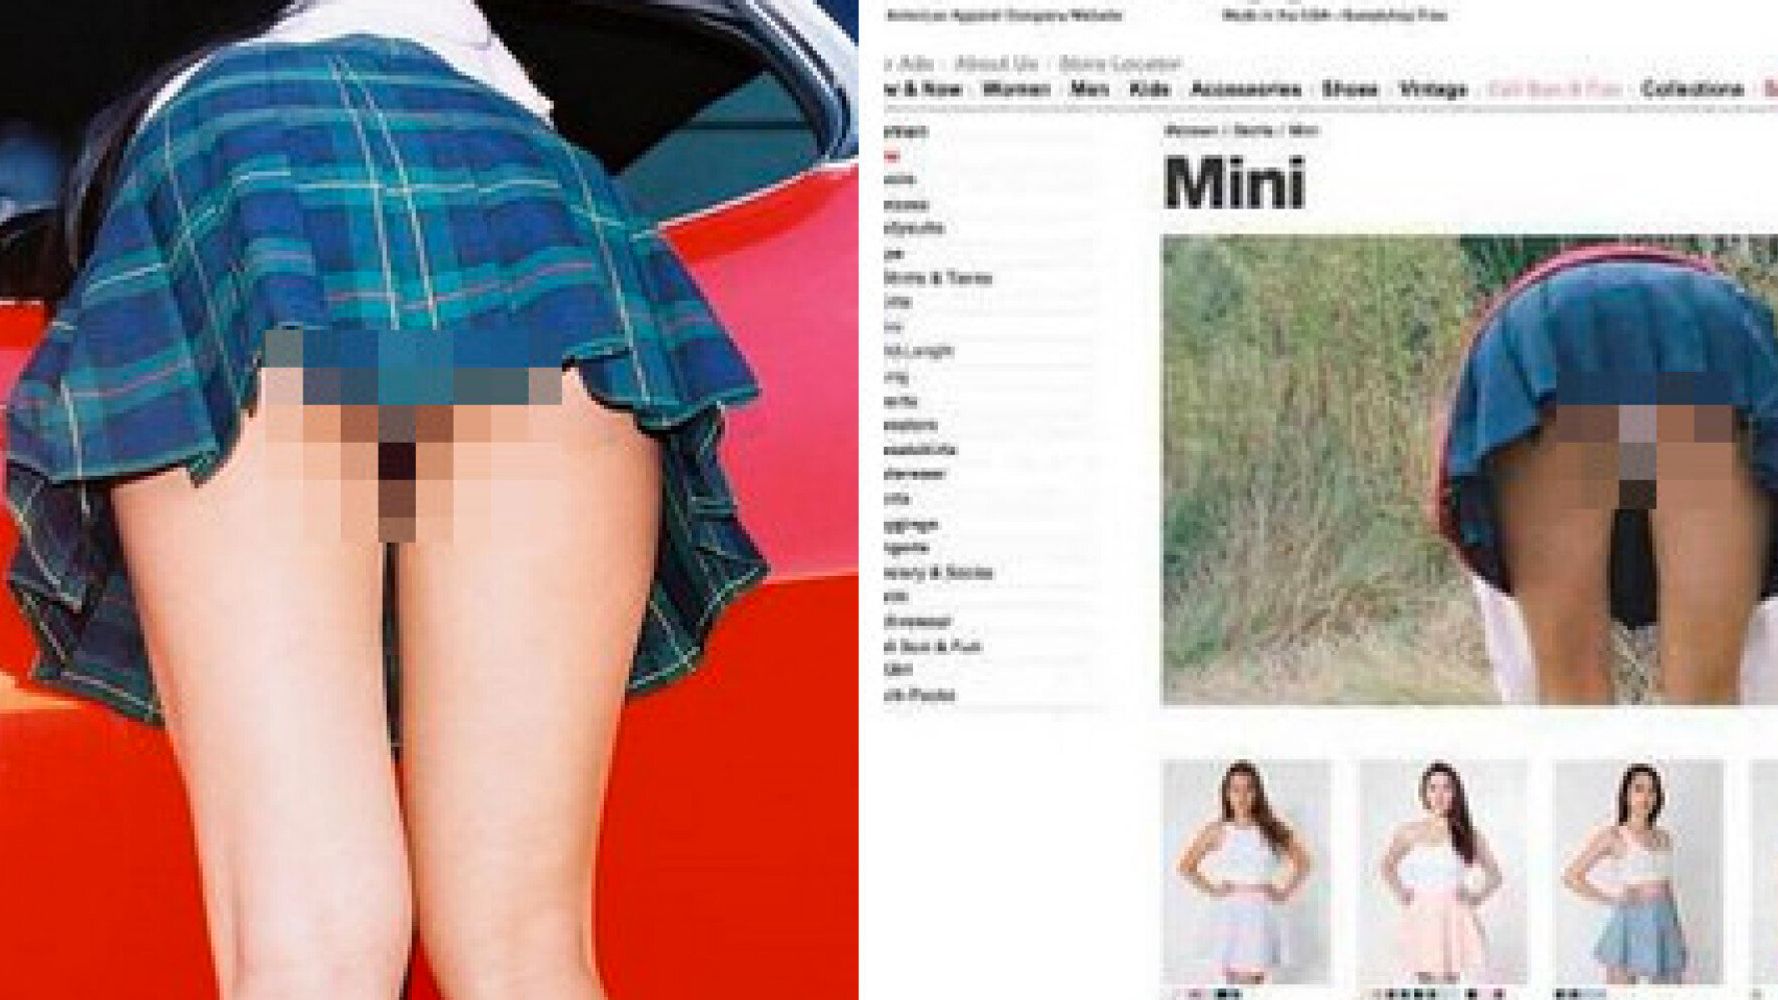 American Apparel 'Sexy School Girl' Skirt Image Labelled 'Underaged Porn'  By The Public | HuffPost UK Life